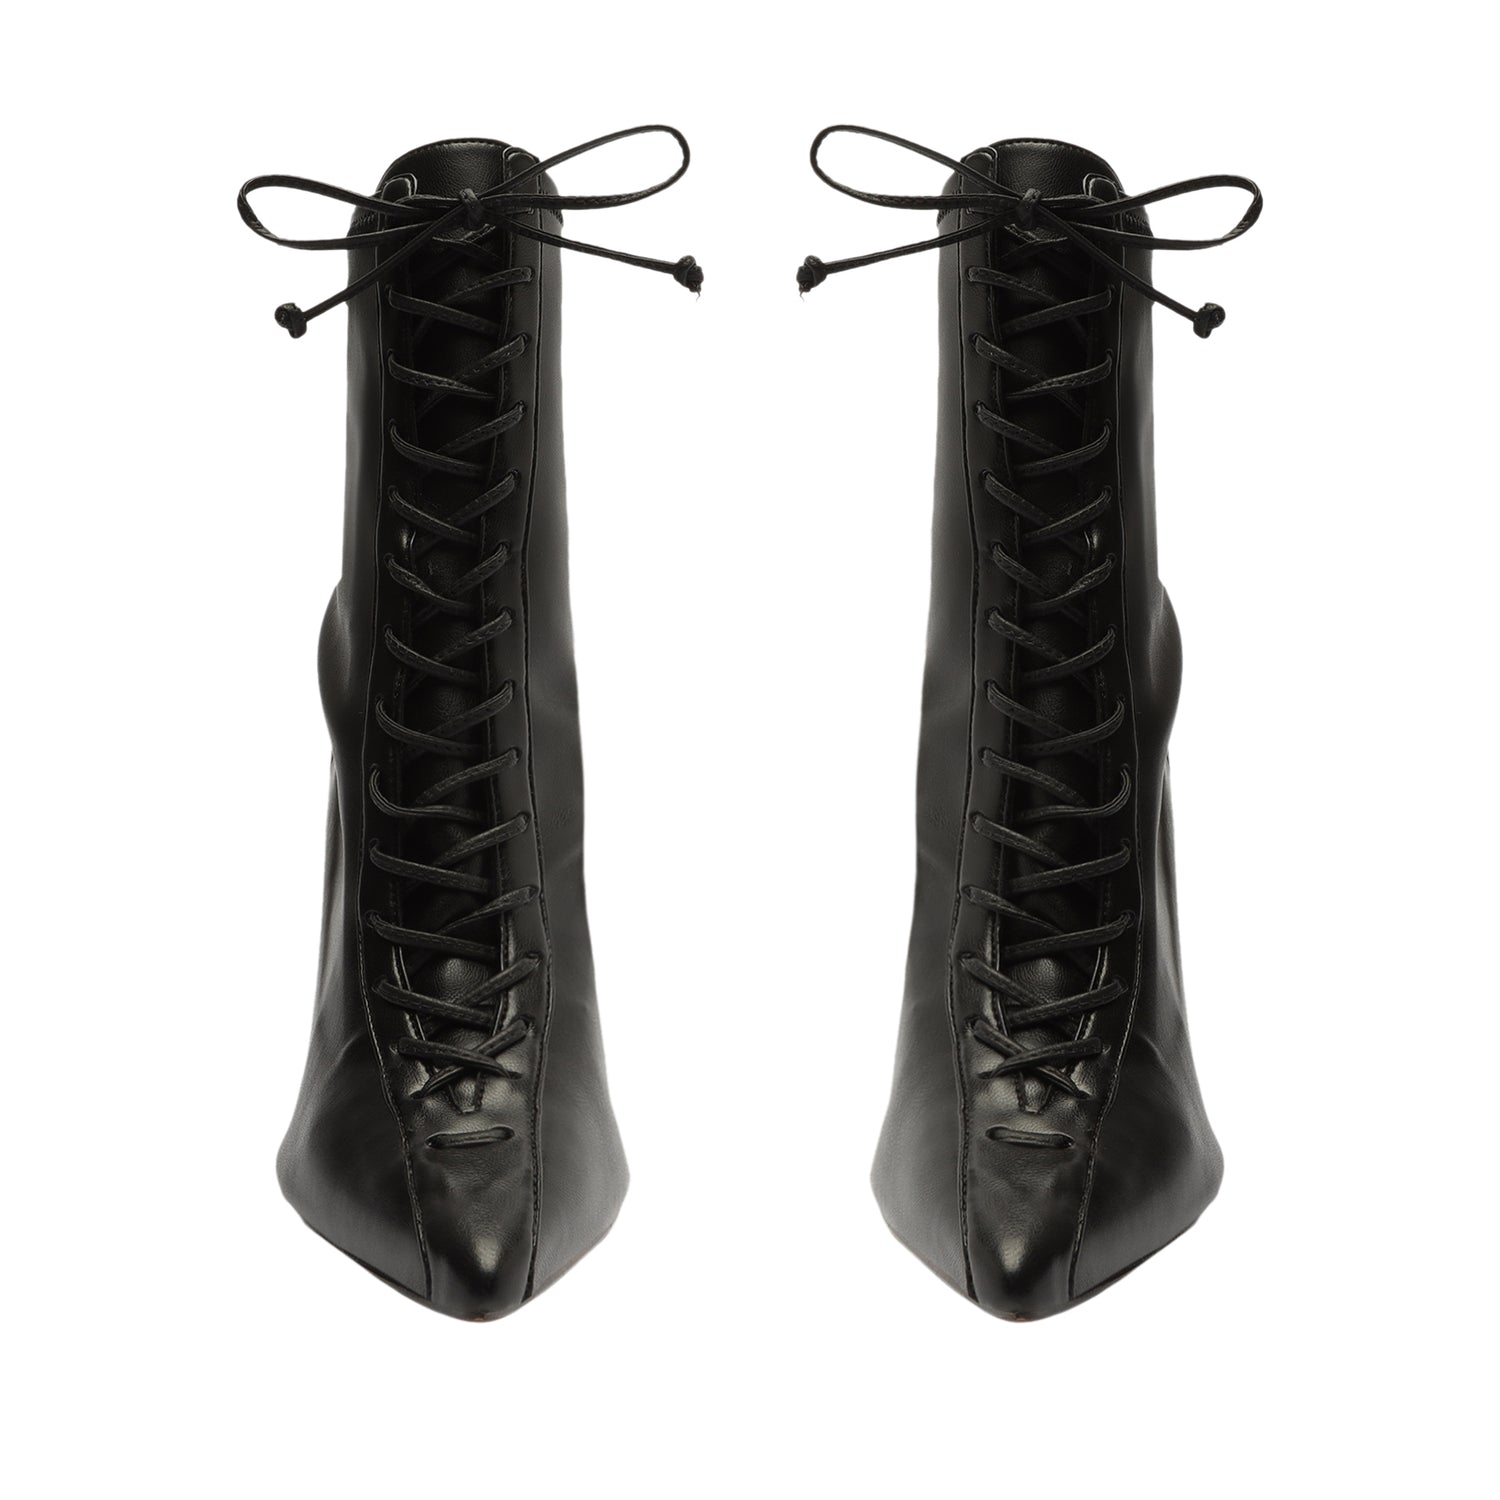 Victory Tall Lace Up Boots